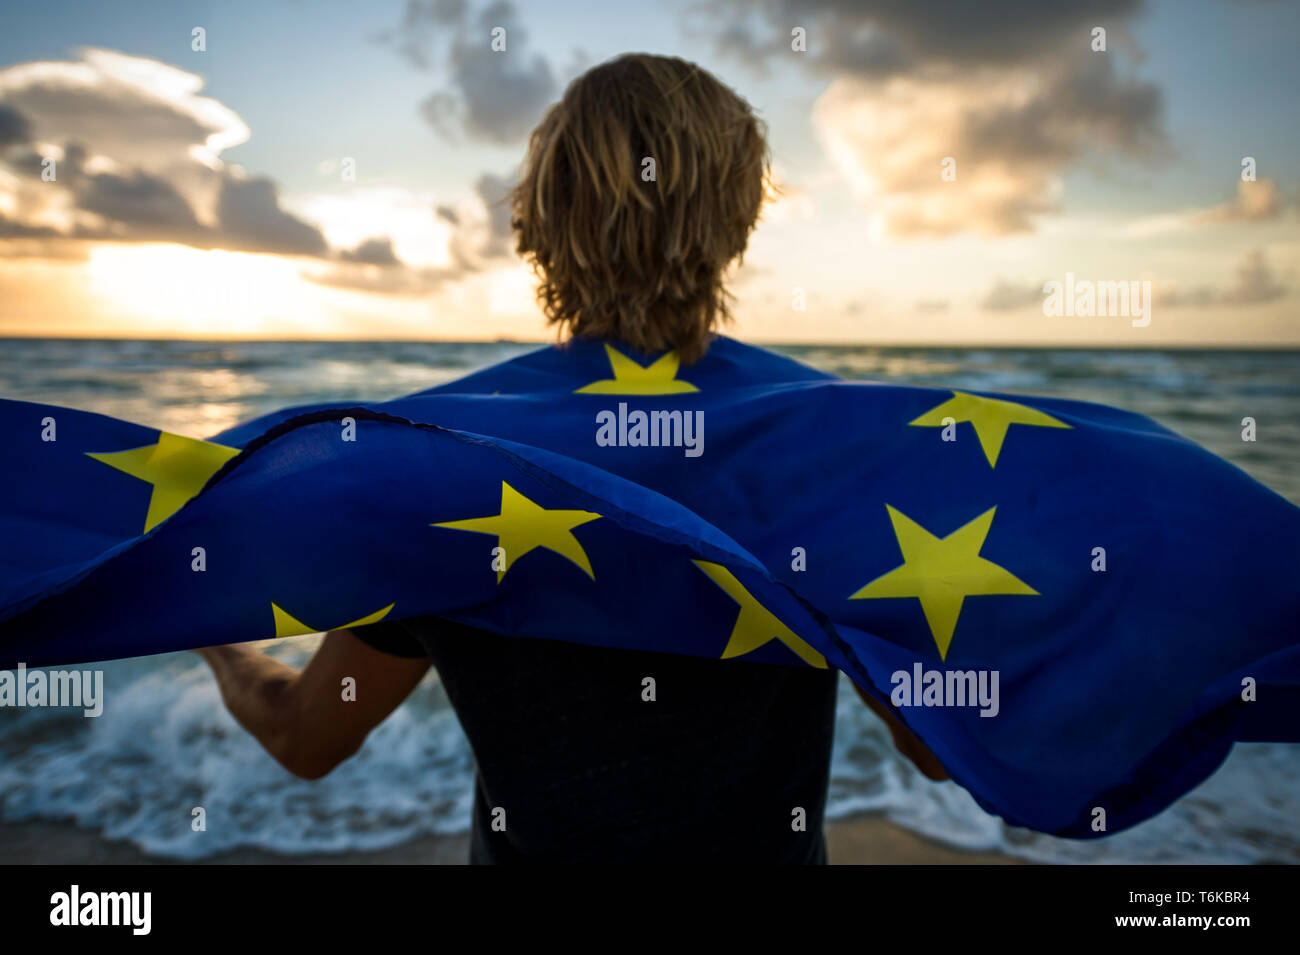 Man with blond hair holding a fluttering EU European Union flag on a sunrise beach  in front of stormy turbulent Channel seas Stock Photo